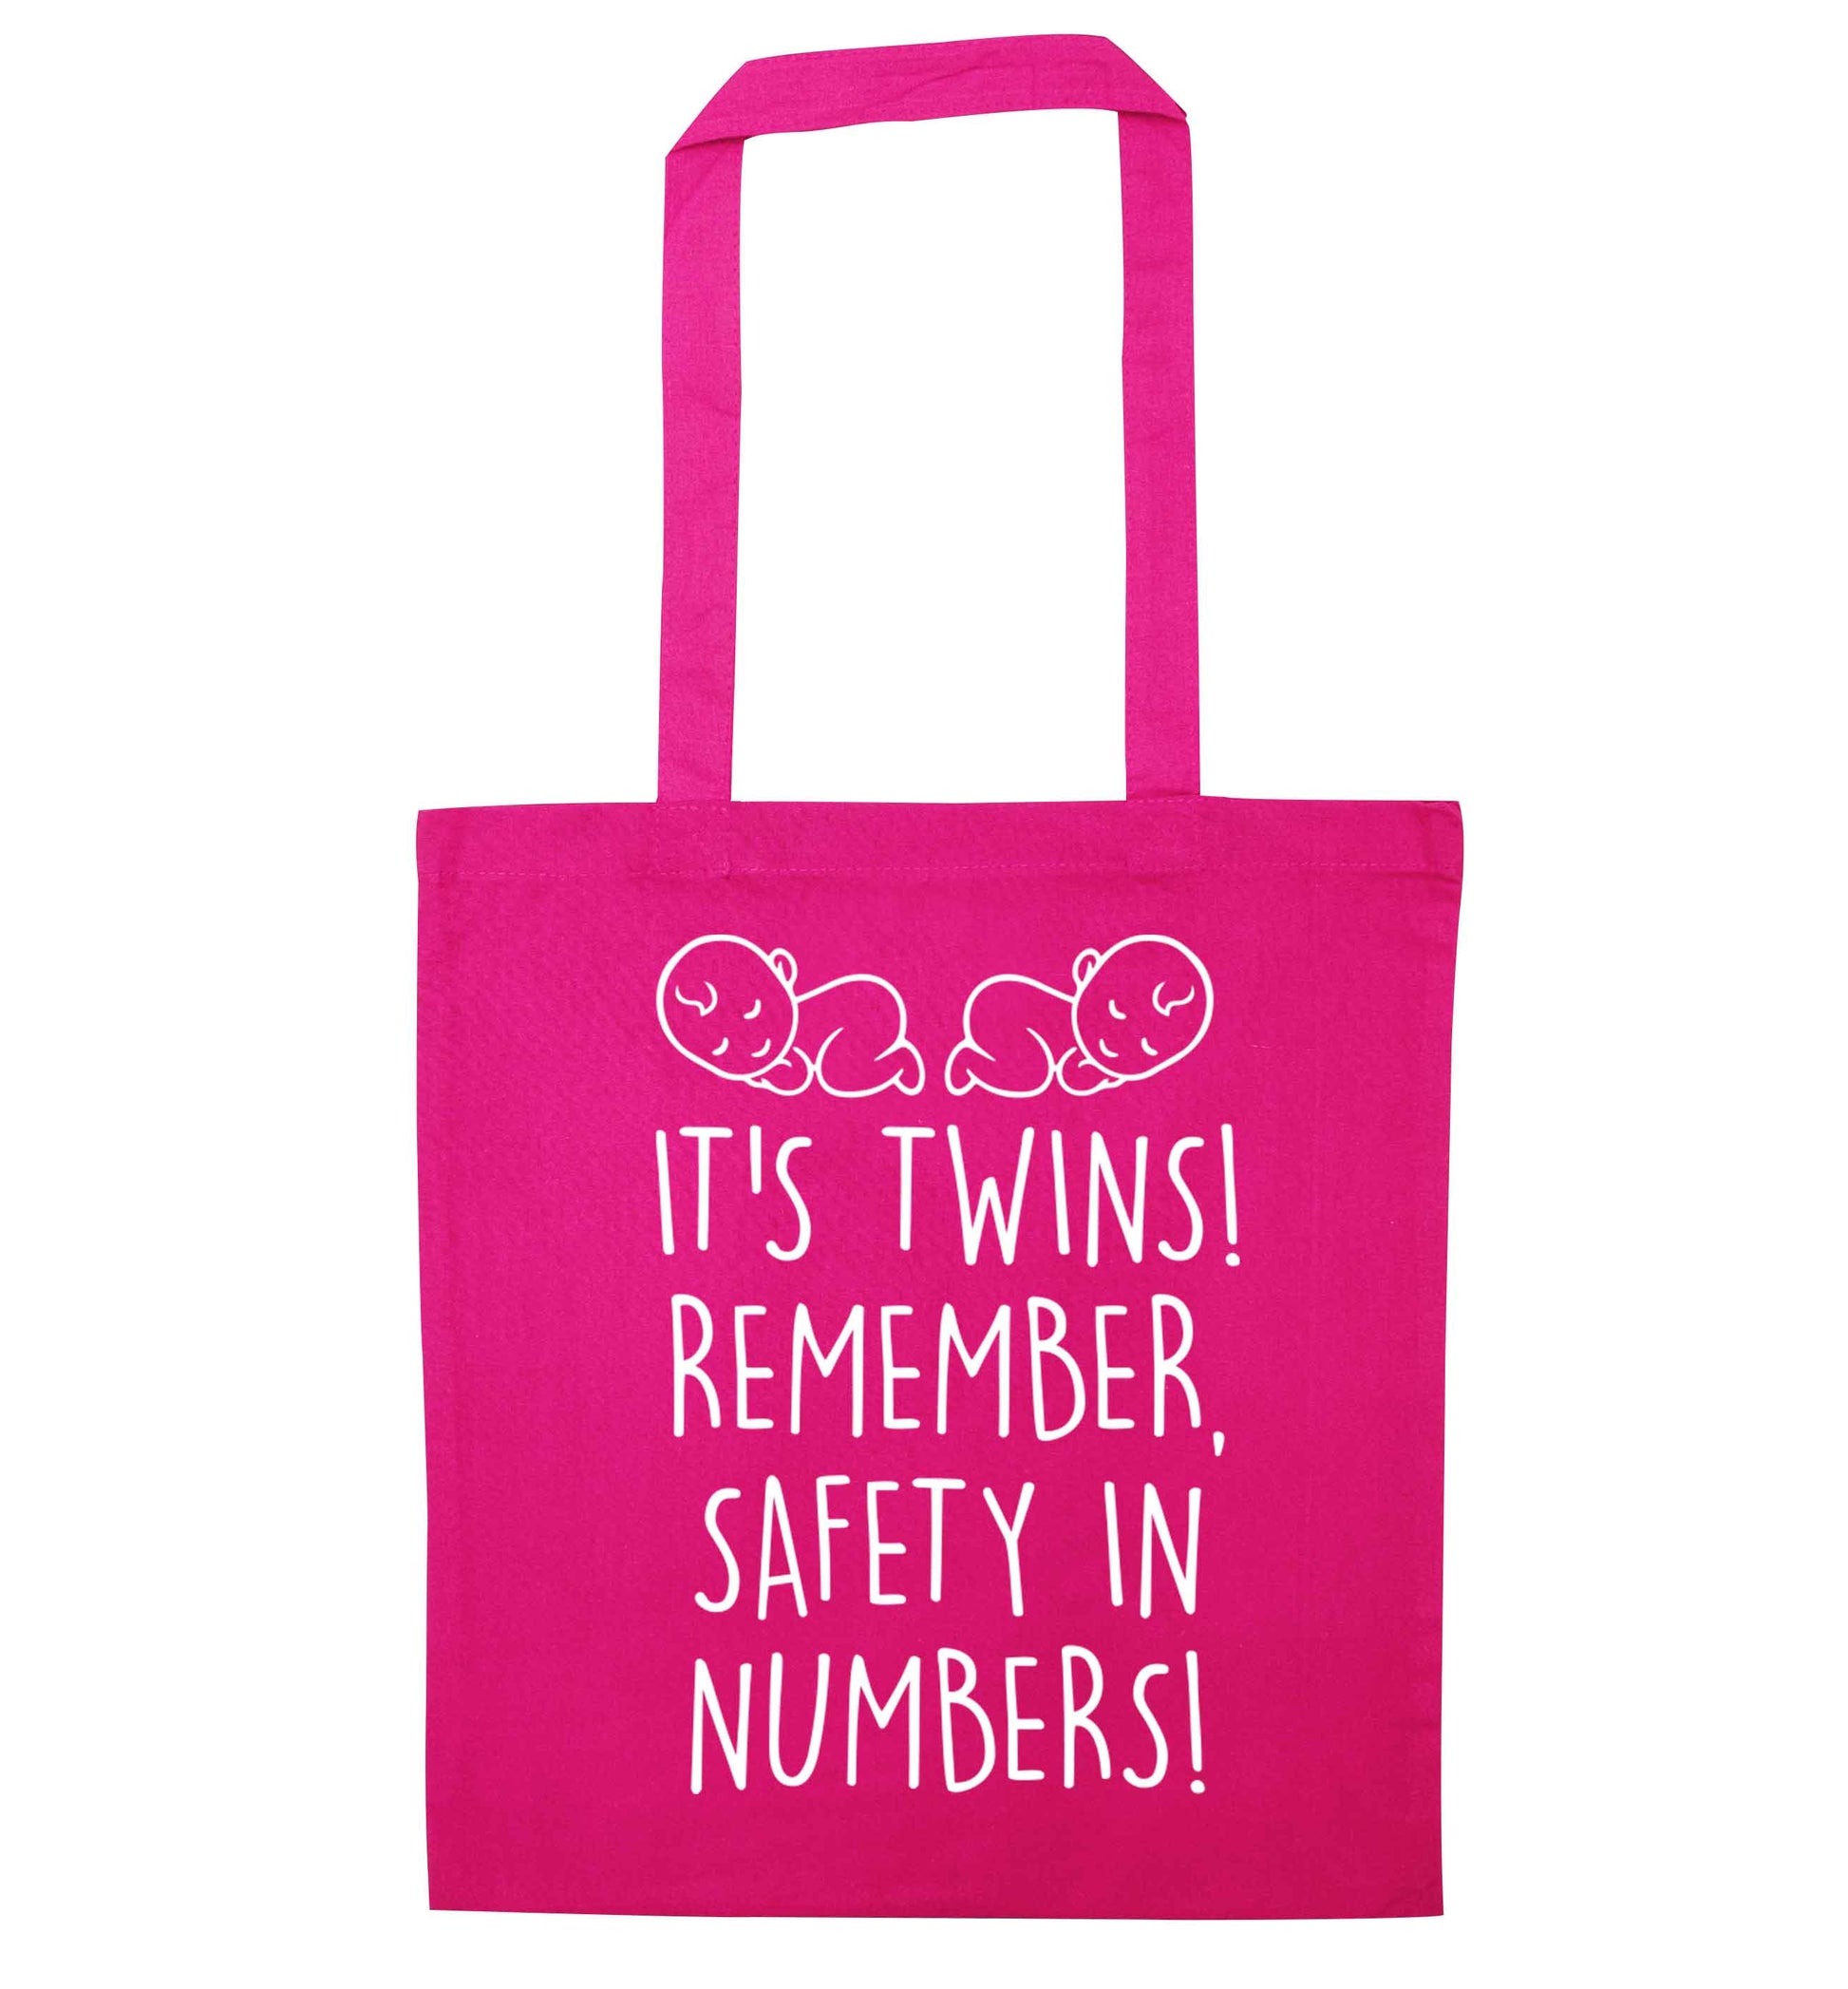 It's twins! Remember safety in numbers! pink tote bag